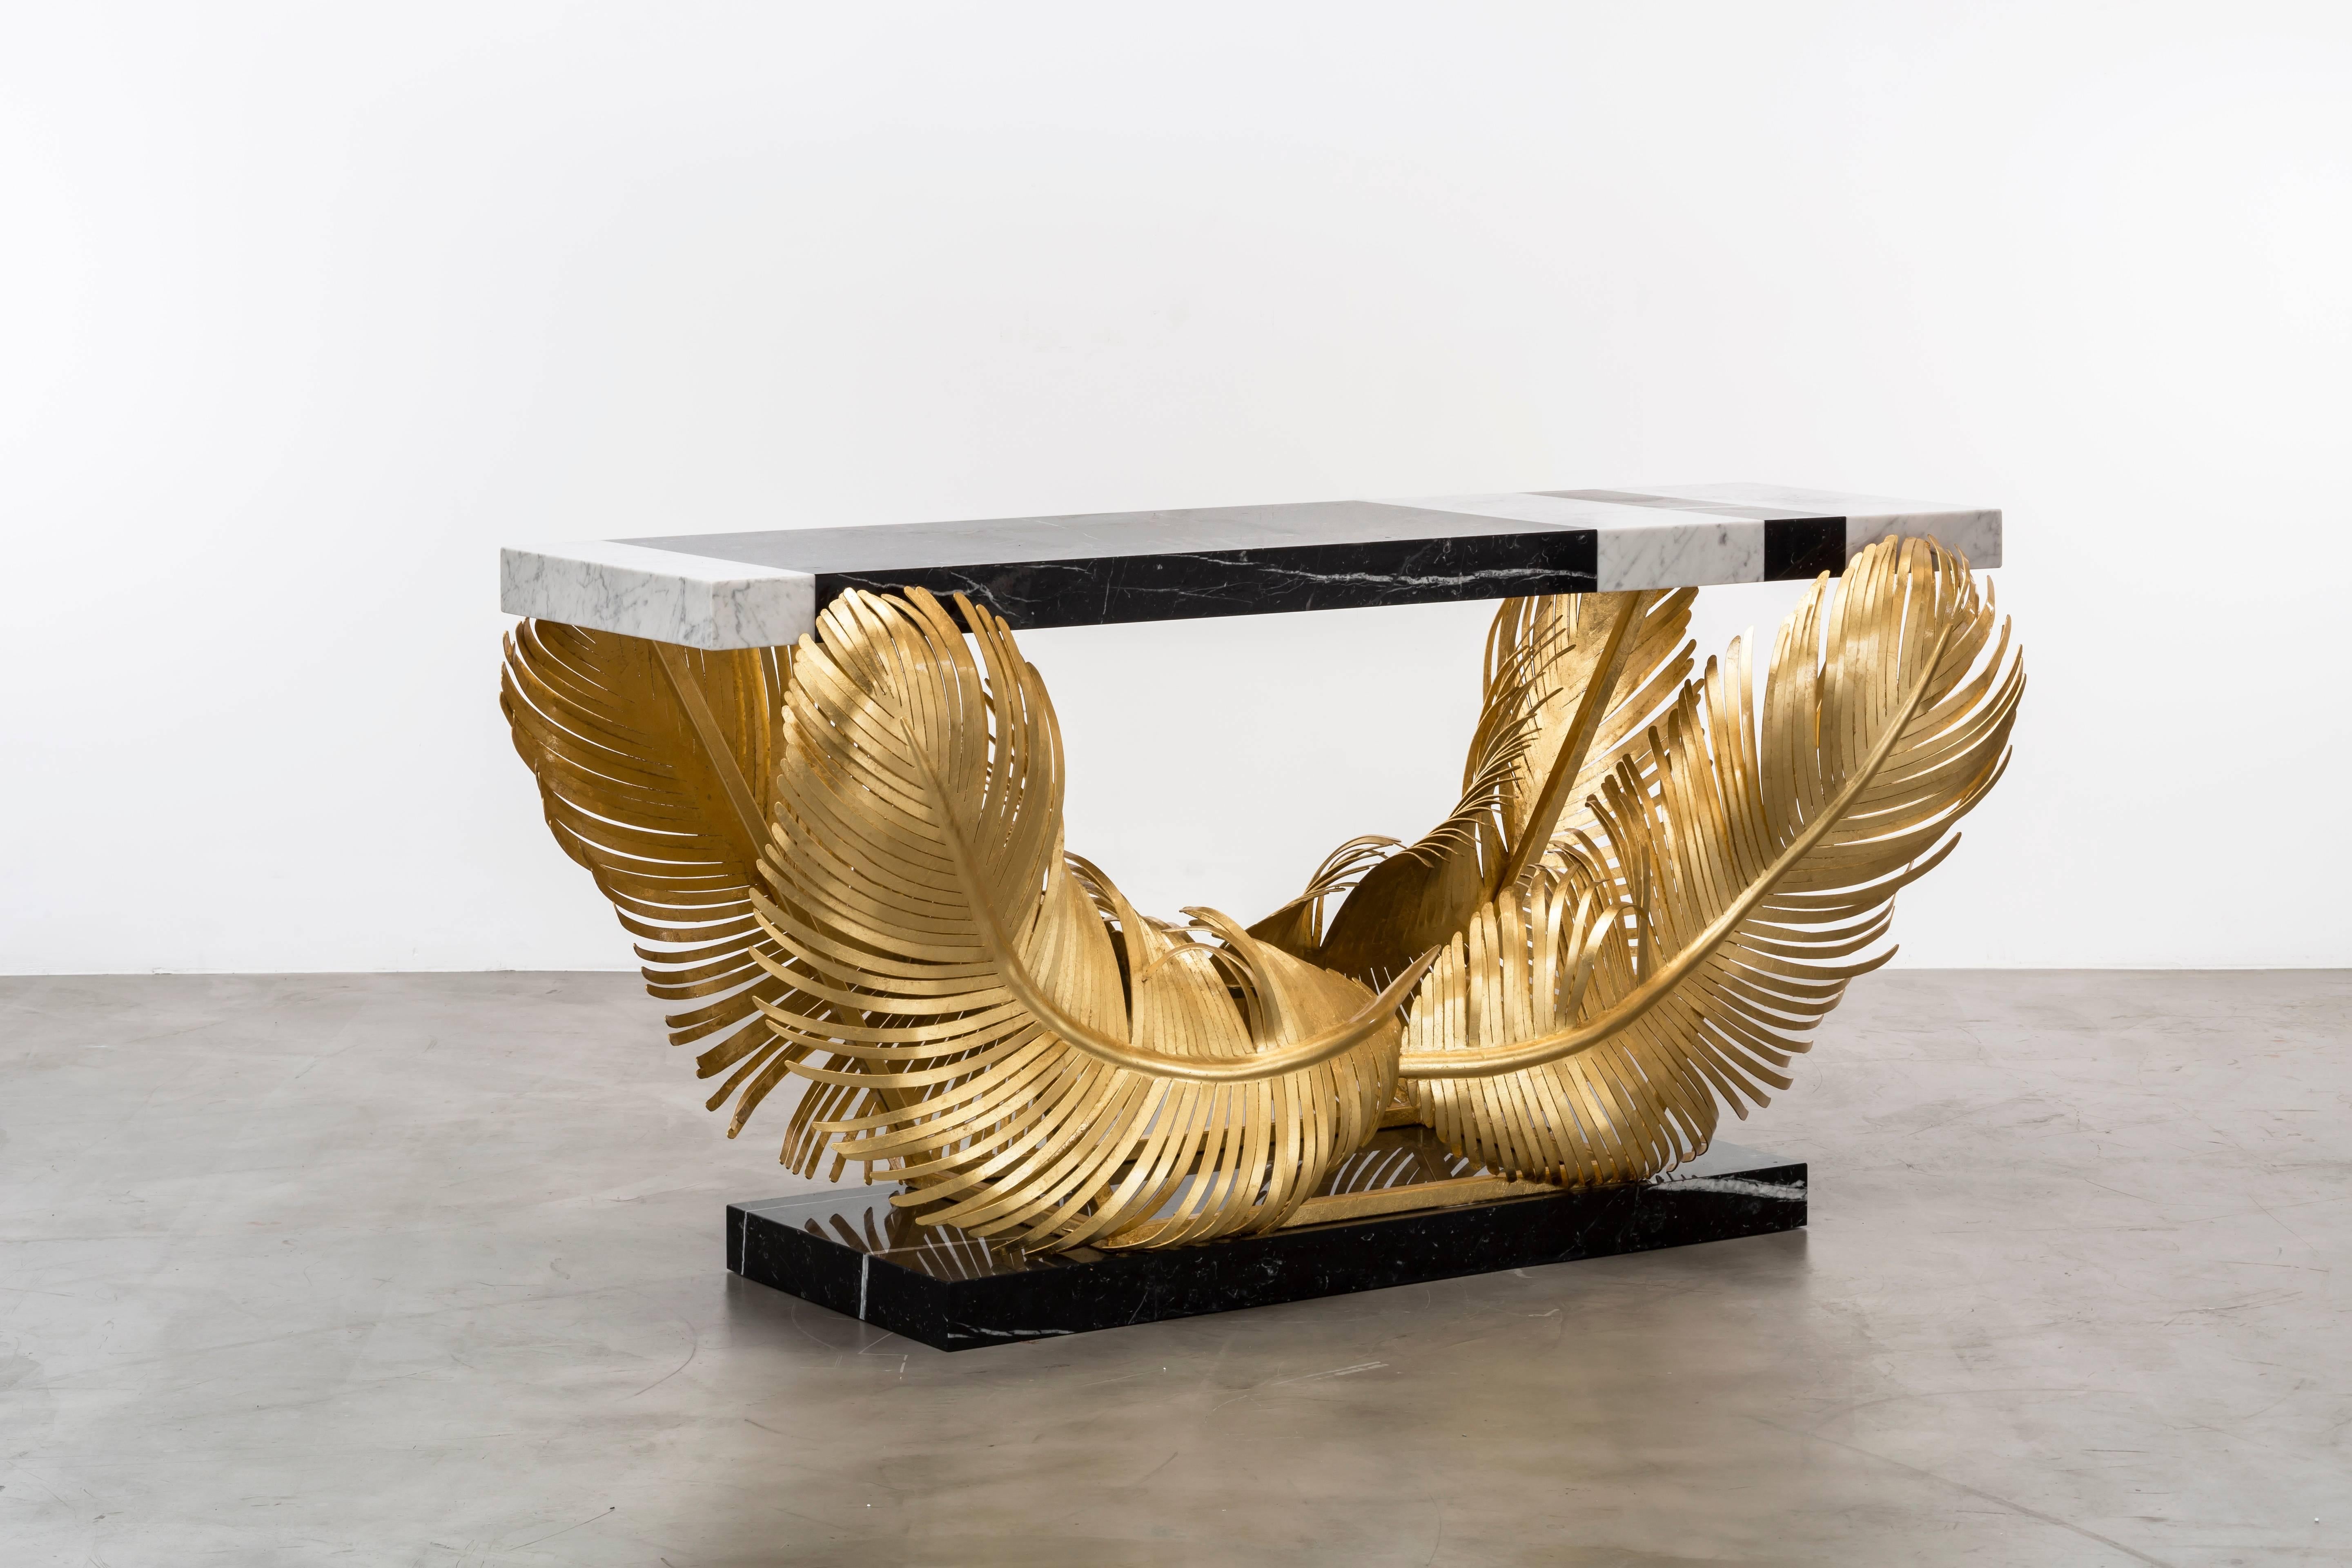 JOSETTE CONSOLE - Modern Gold Leafed and Marble Console

The Josette Console table is a stunning and unique piece of furniture that is sure to make a statement in any room. Hand-forged with gold leaf over iron, this console table features sculptural